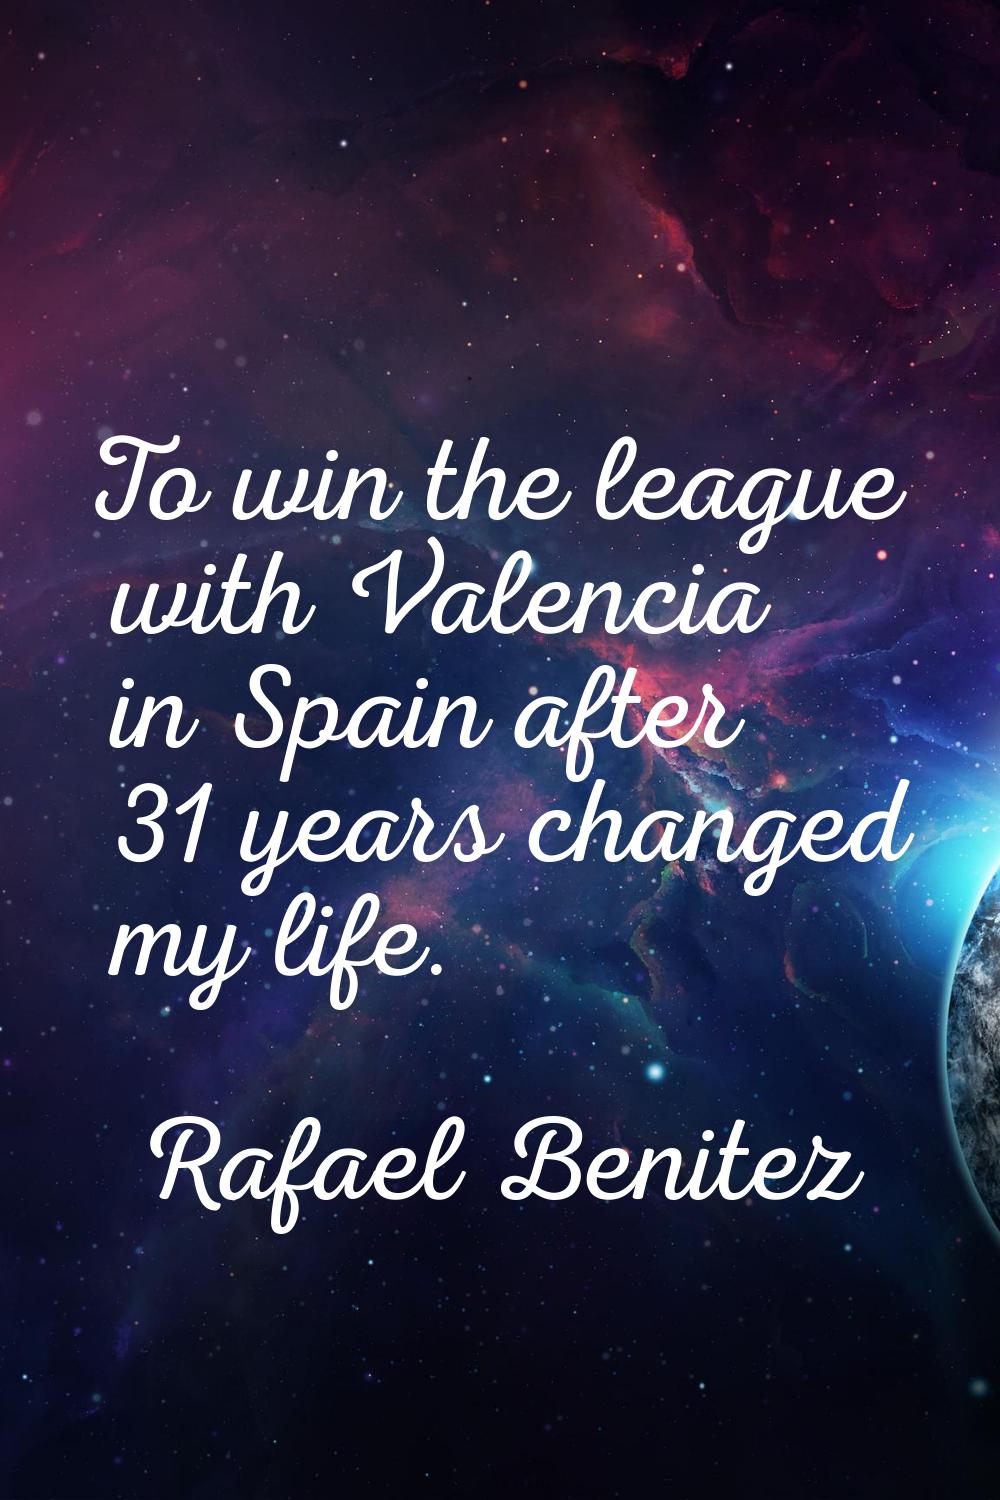 To win the league with Valencia in Spain after 31 years changed my life.